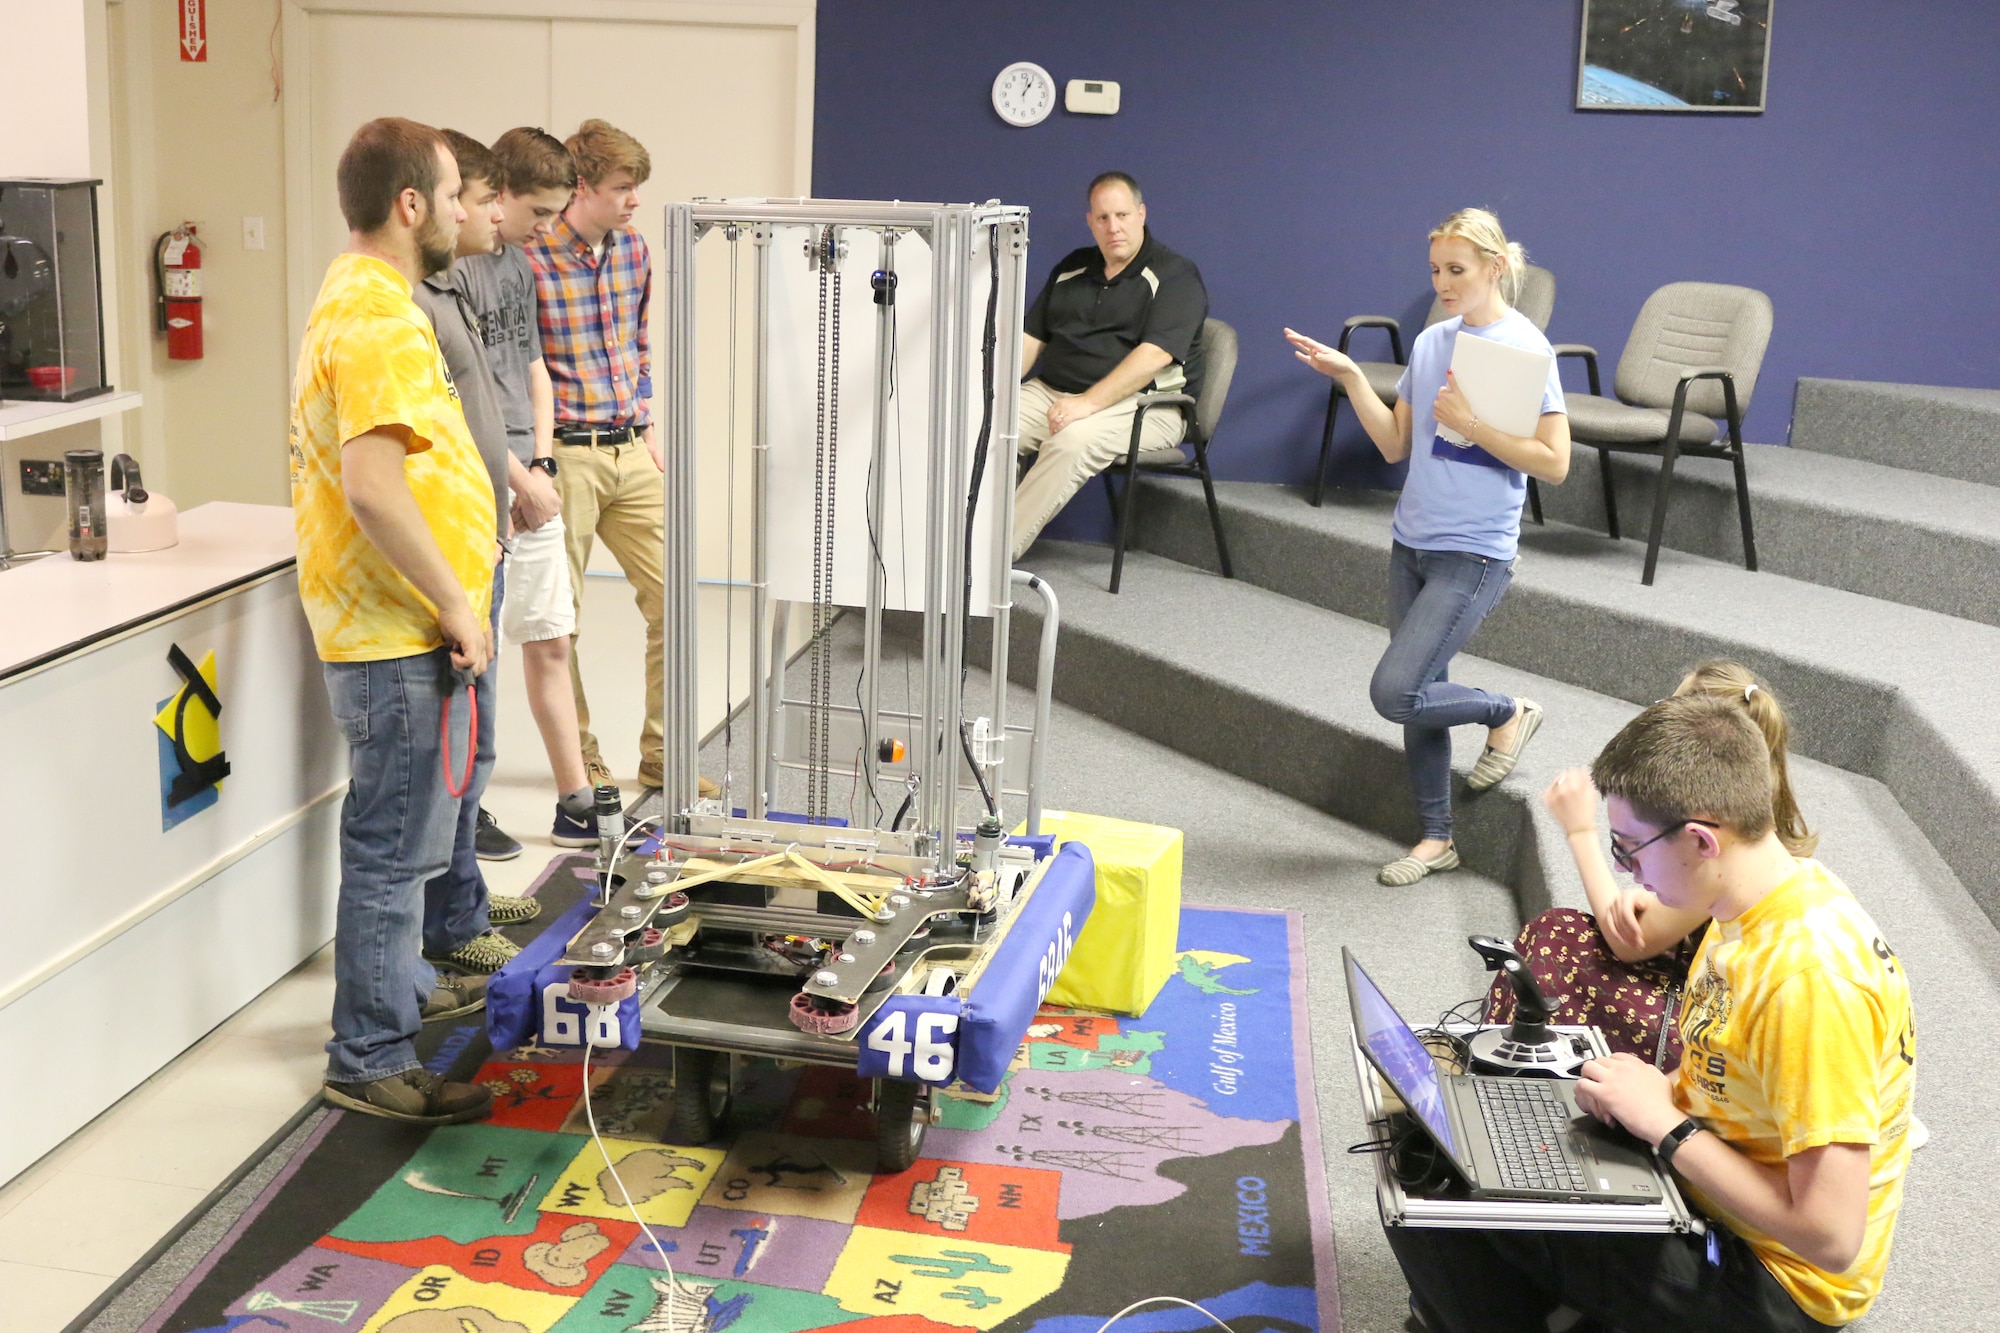 Olga Oakley, the Hands-On Science Center Air Force STEM director, at right standing, asks the Central Magnet Robotics team about their trip to the FIRST® Robotics World Championship in Houston, Texas. The Central Magnet Robotics team visited the HOSC in Tullahoma May 1 to give a demonstration. Pictured, starting left standing, are Aidan Gibson, Jimmy Jones, David Schafer, Drew Dove, Marc Guthrie, Olga Oakley, Maddy Perrien and Ethan Davenport. (U.S. Air Force photo/Deidre Ortiz)